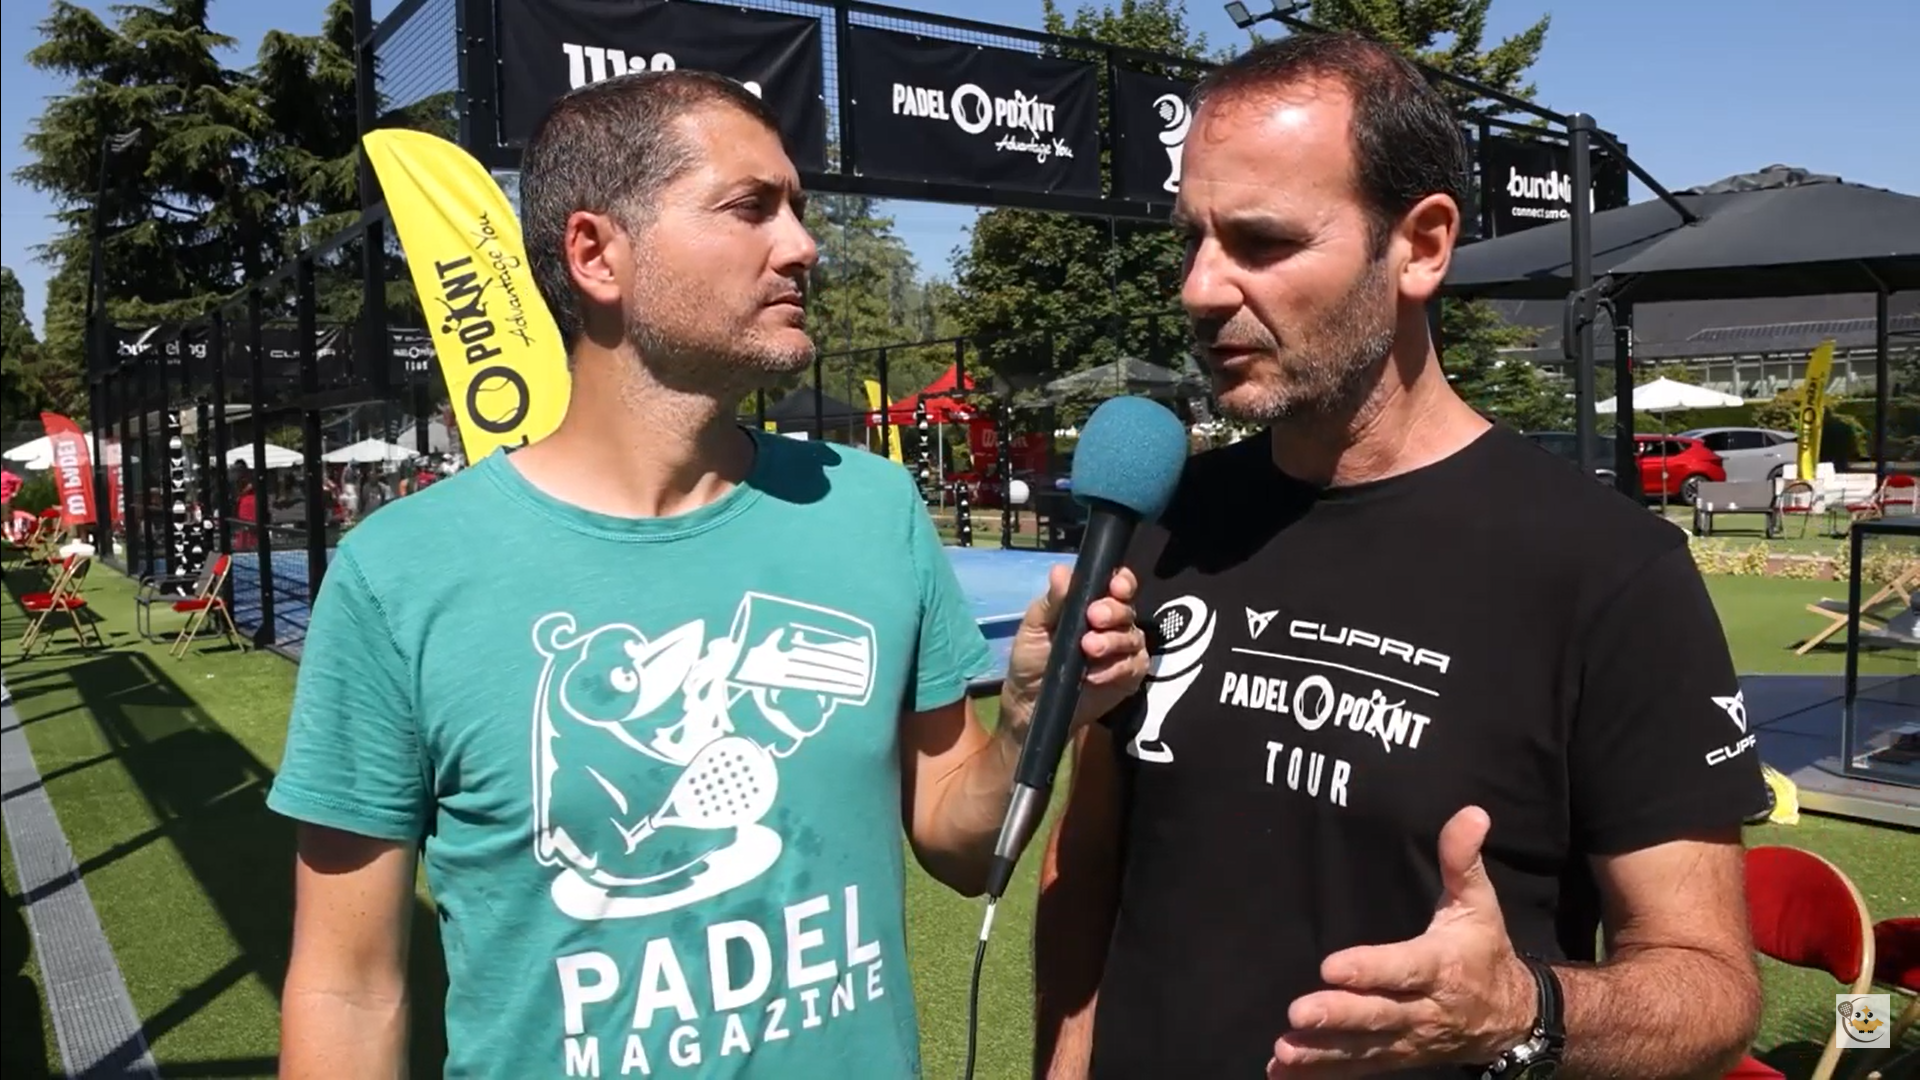 Franck Lemousse: “Two emblematic players of the French team for the Cupra Padel-Point Tour"